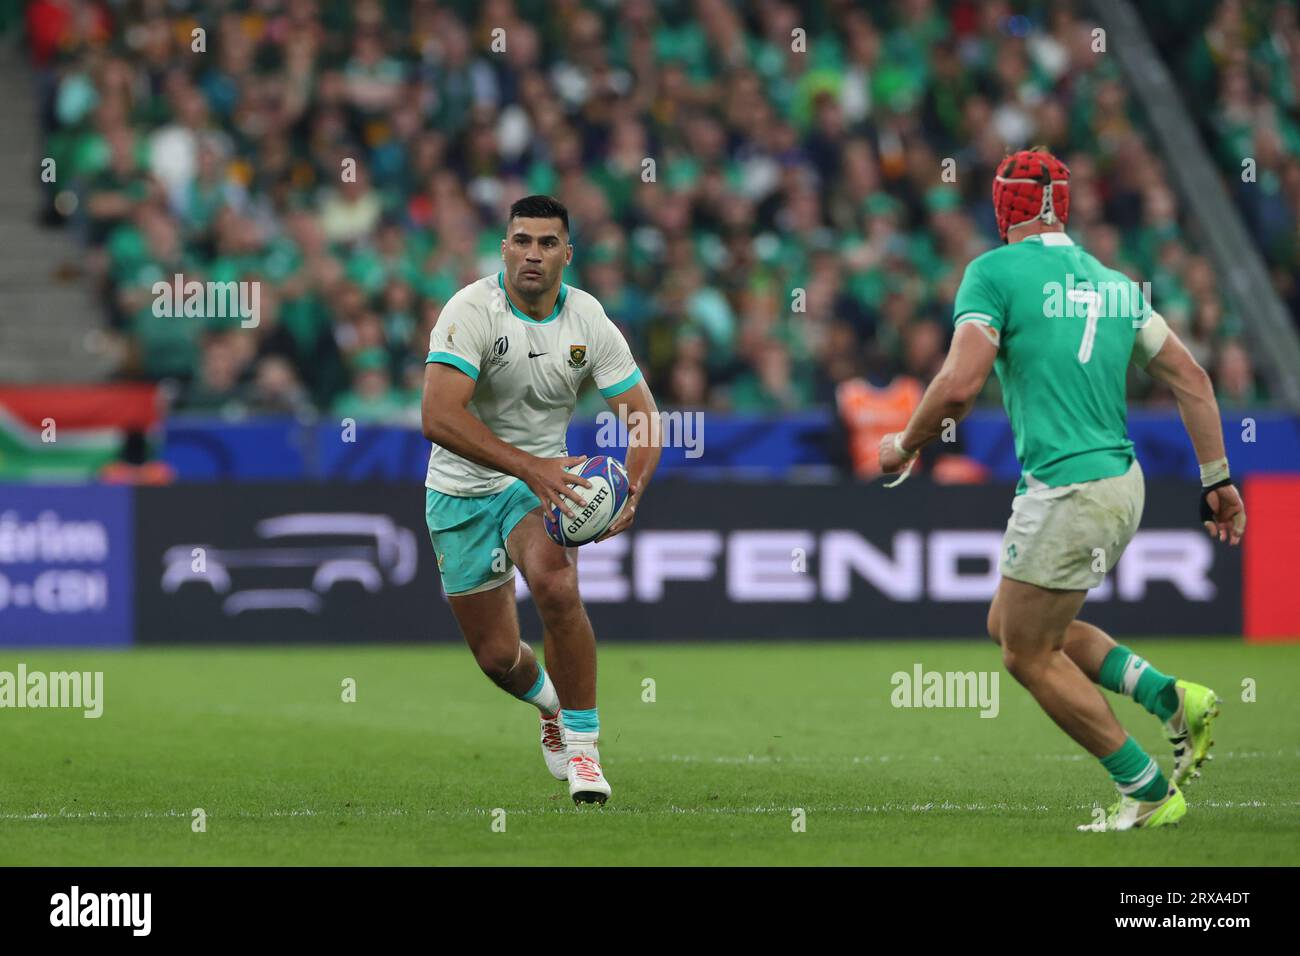 South Africa's Damian de Allende during the 2023 Rugby World Cup Pool B match between South Africa and Ireland at the Stade de France in Saint-Denis, outside Paris, Saturday, Sept. 23, 2023. Credit: Aki Nagao/AFLO/Alamy Live News Stock Photo